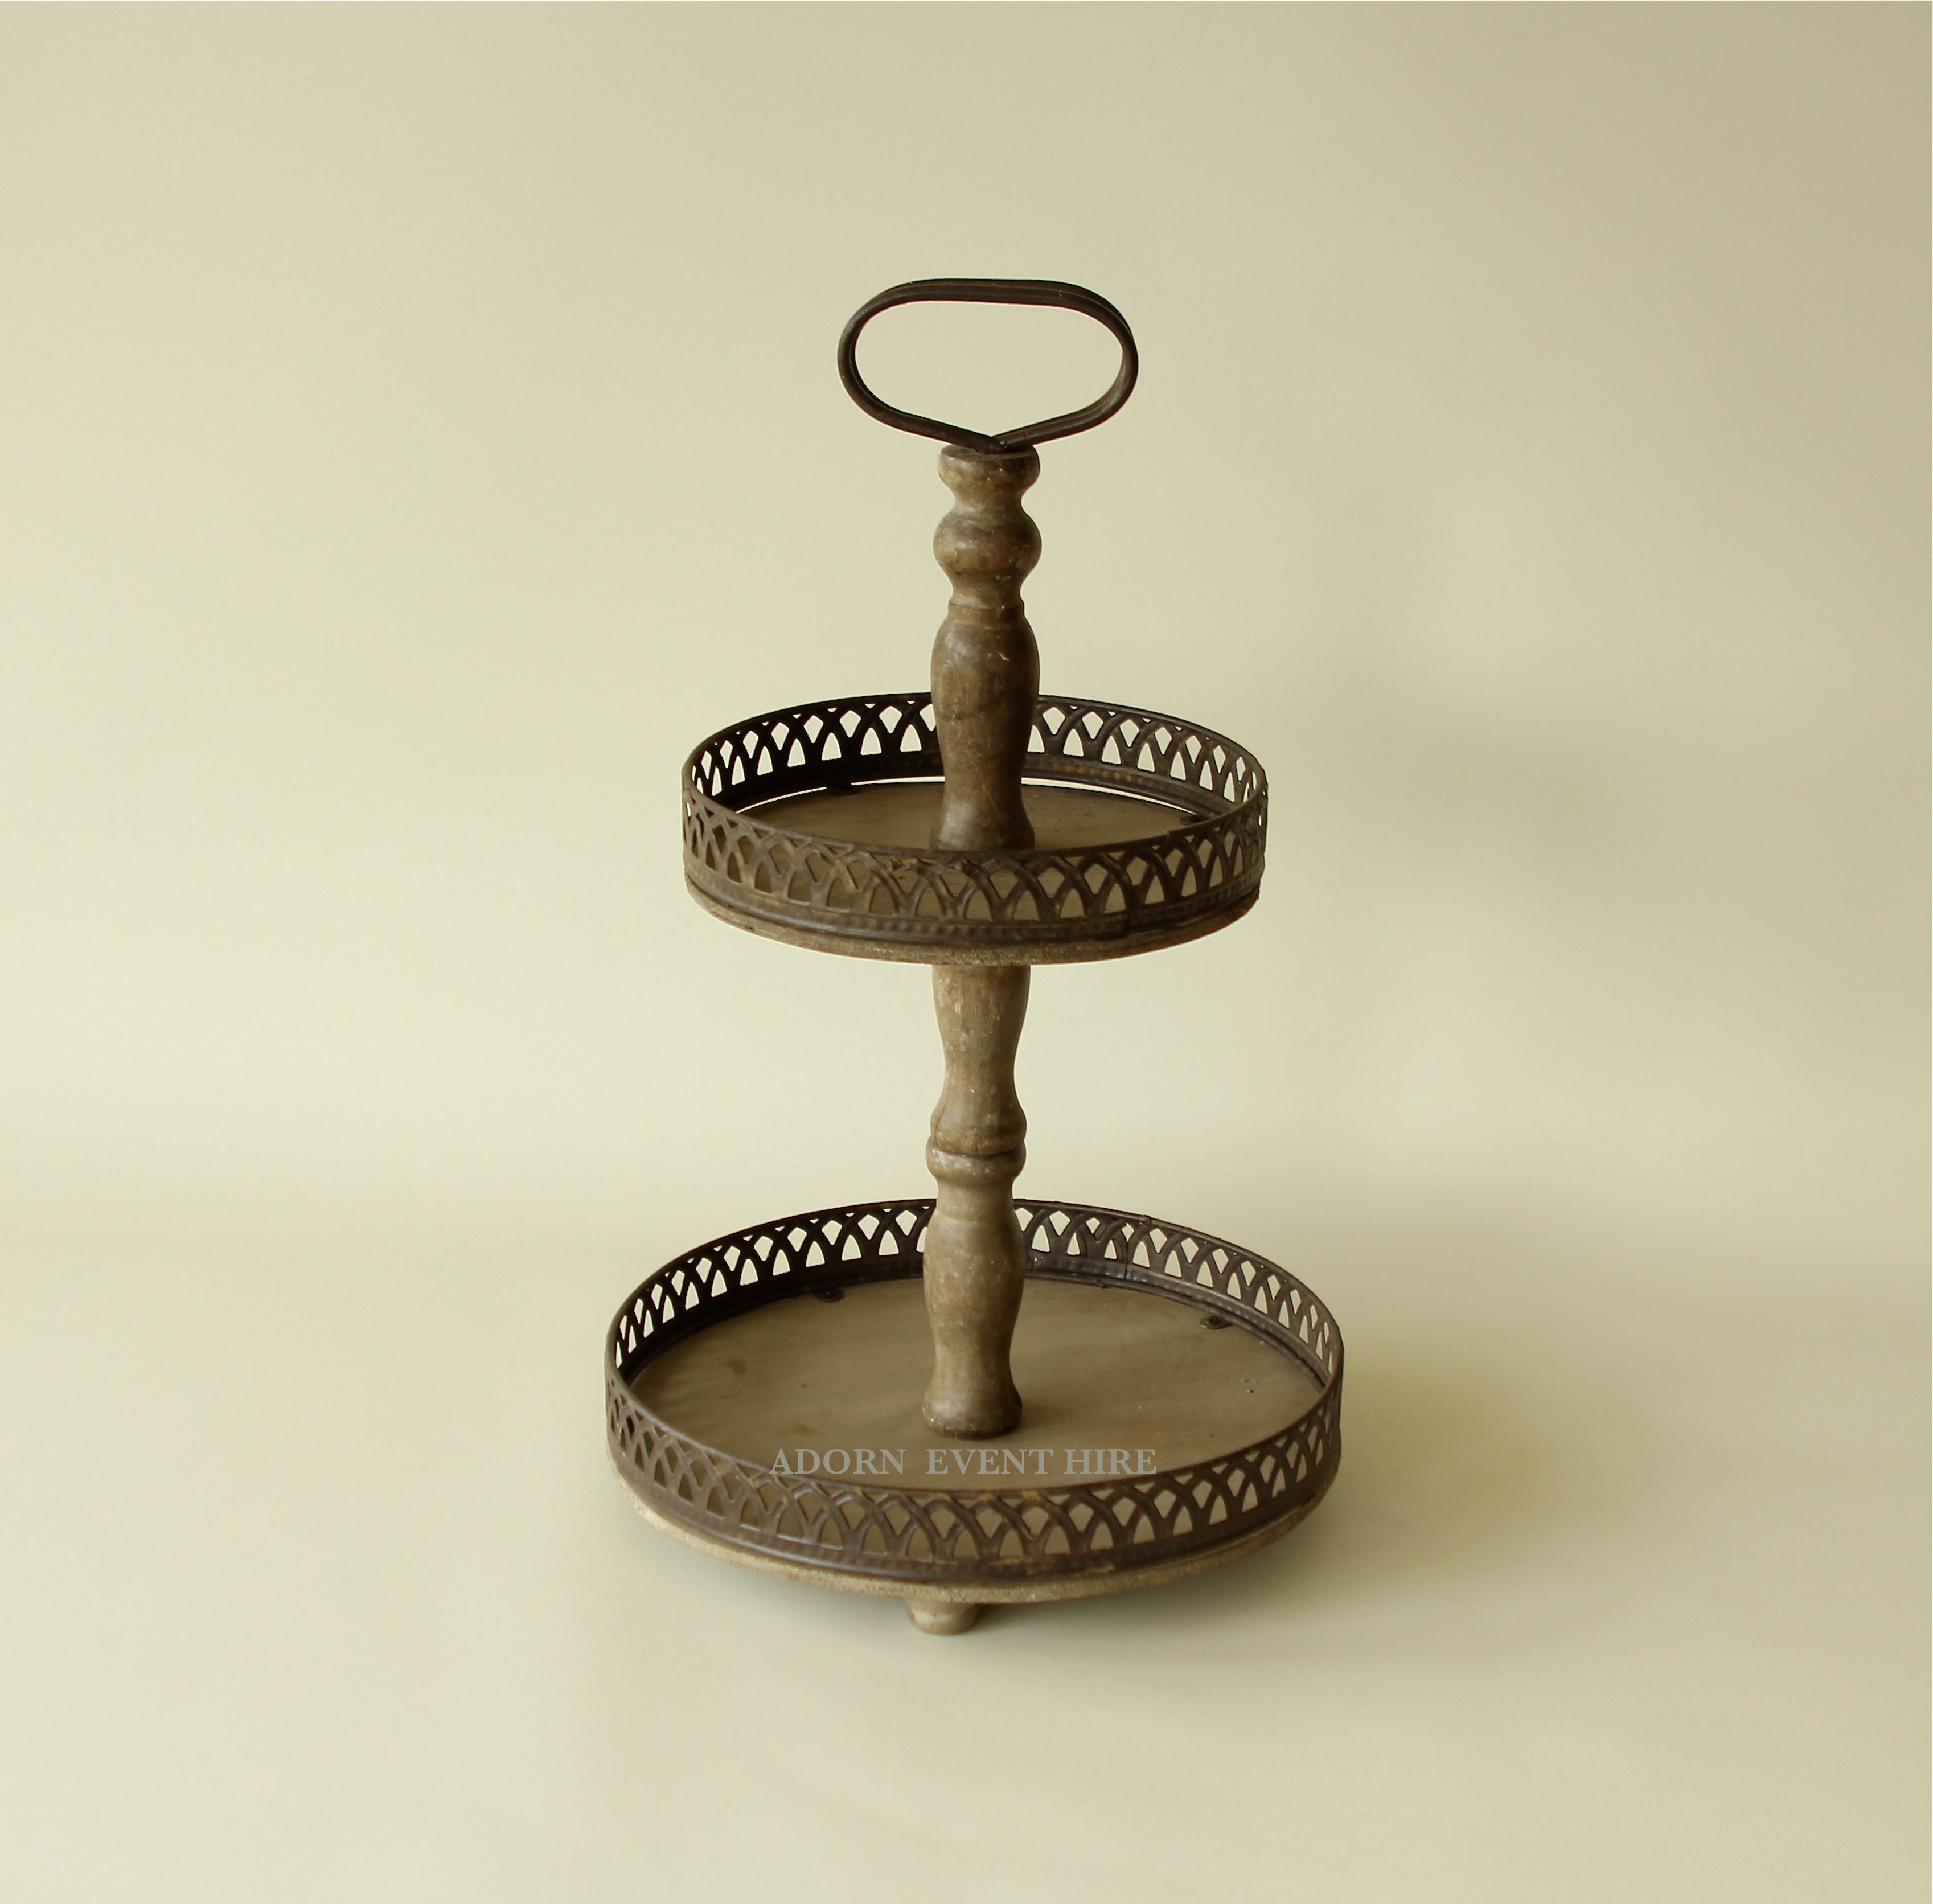 4 tier cake stands